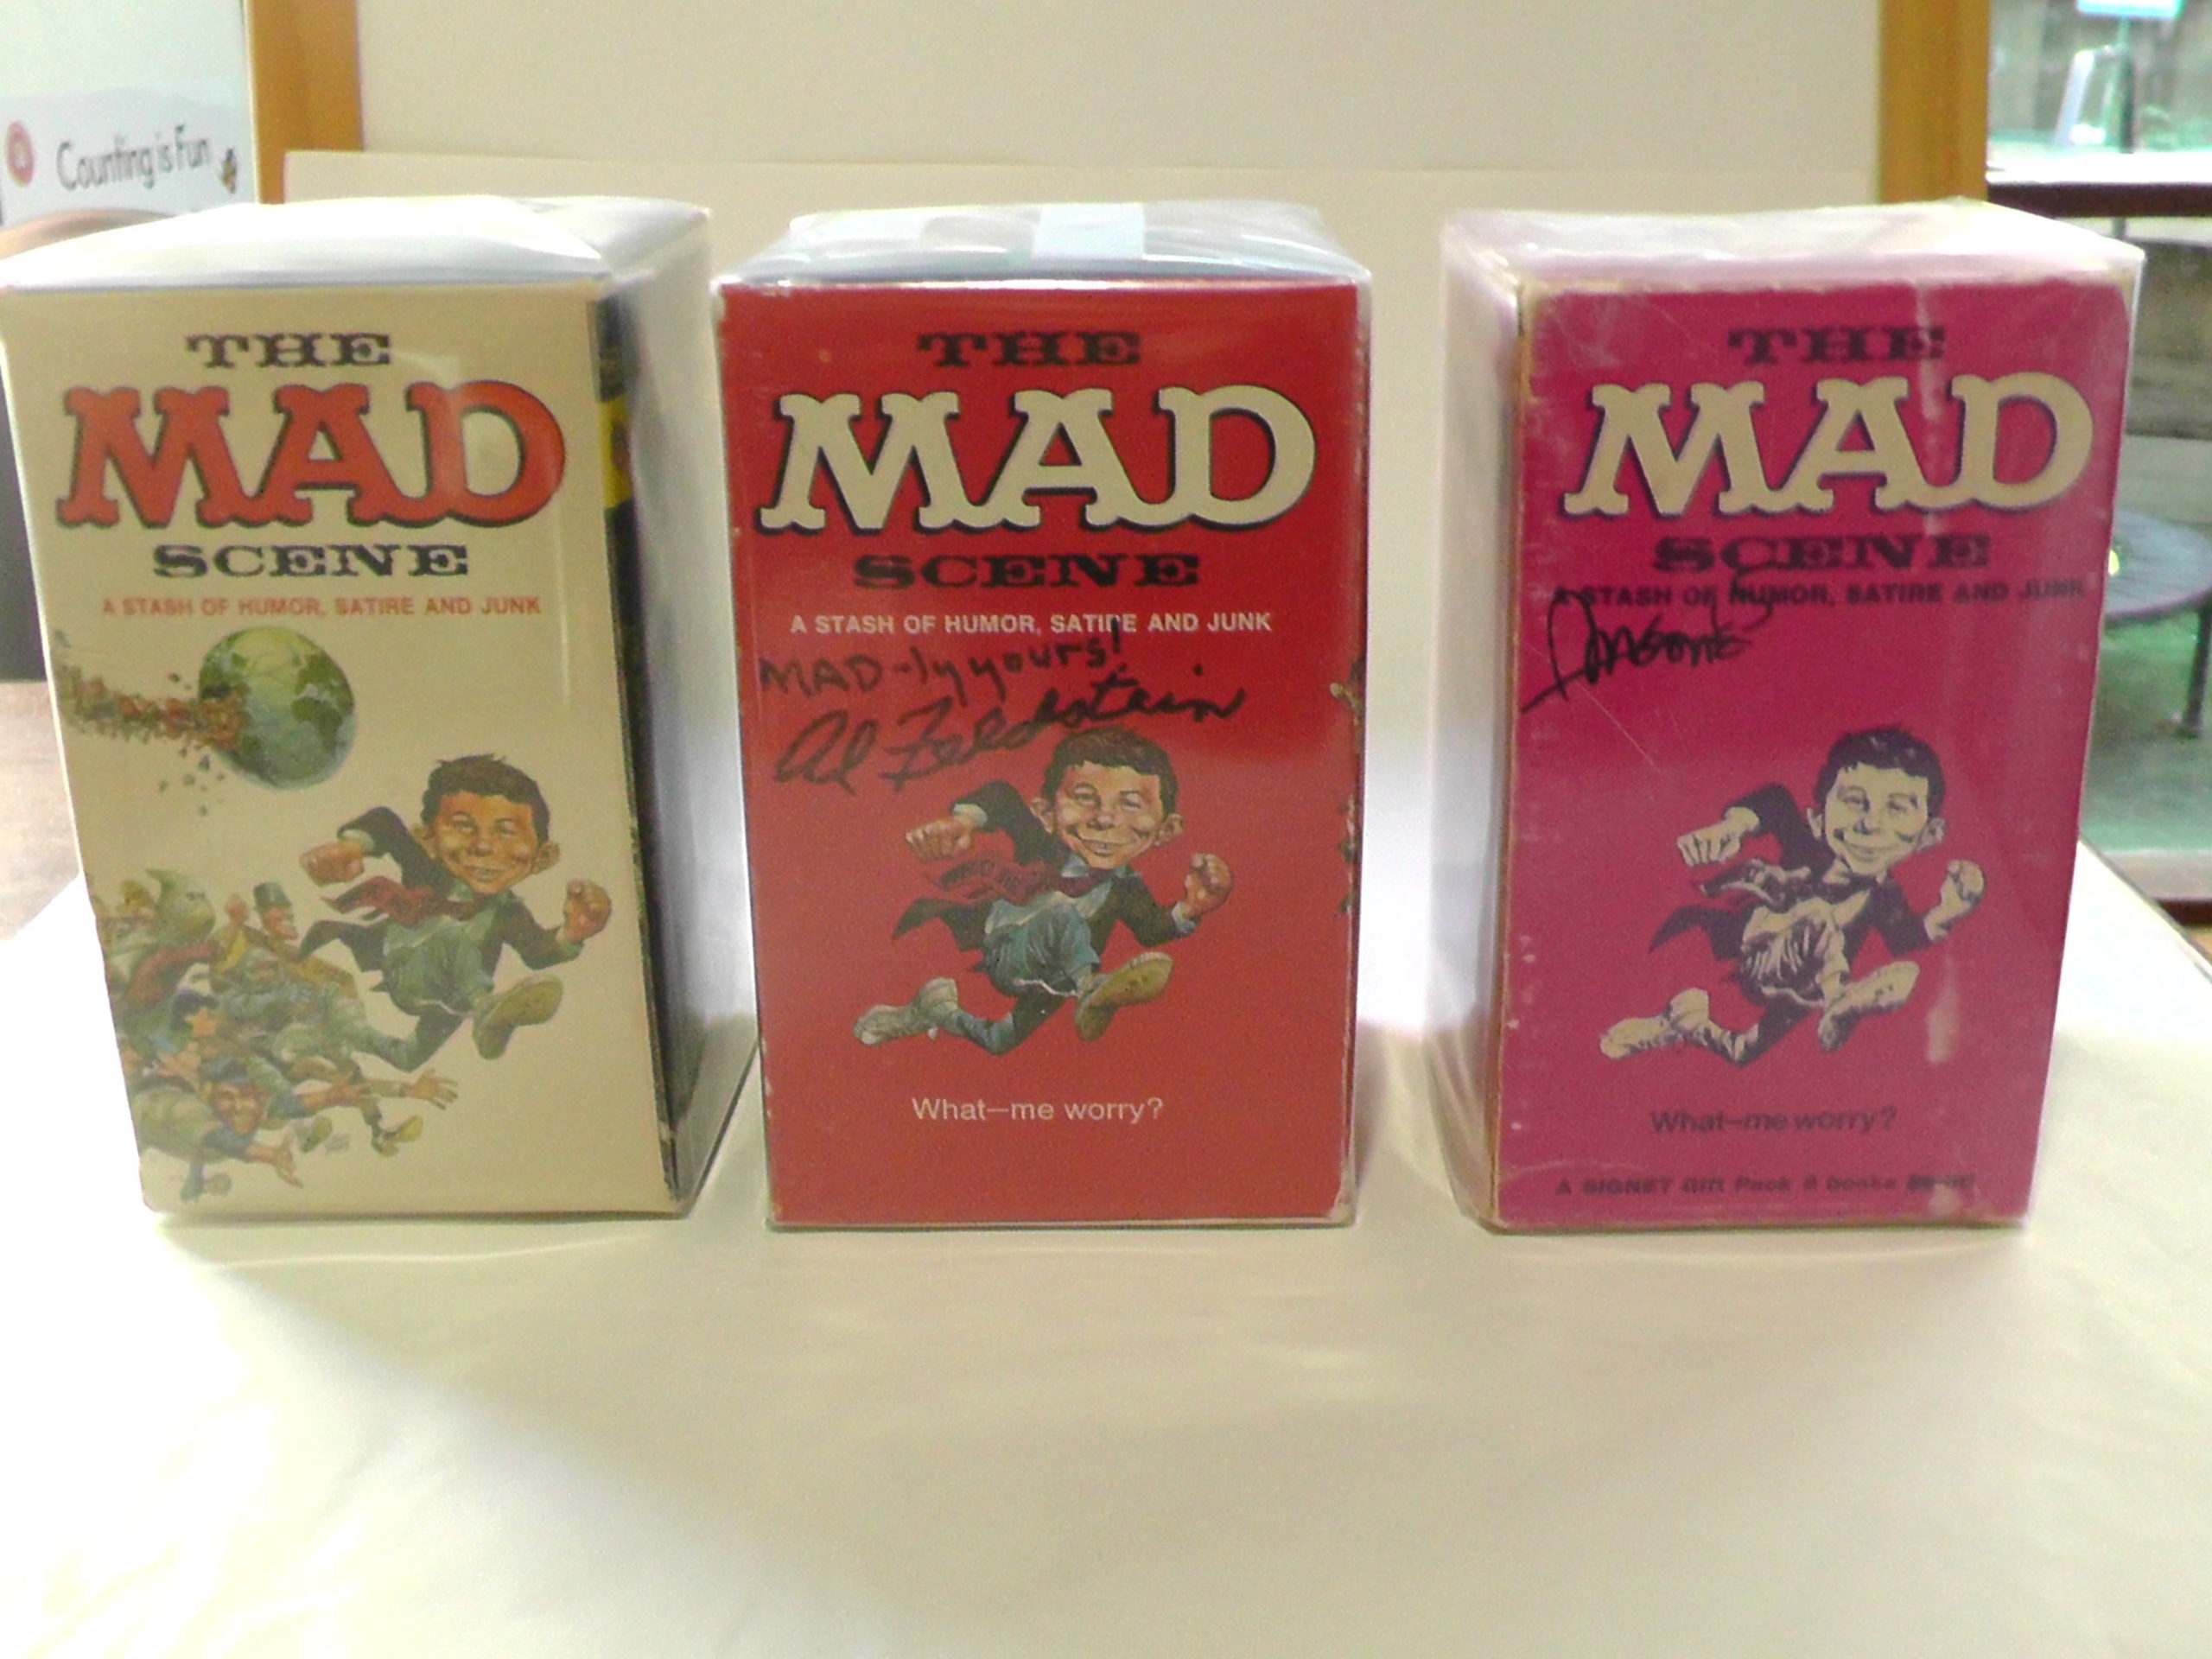 All versions of the MAD Scene Paperback Gift Sets